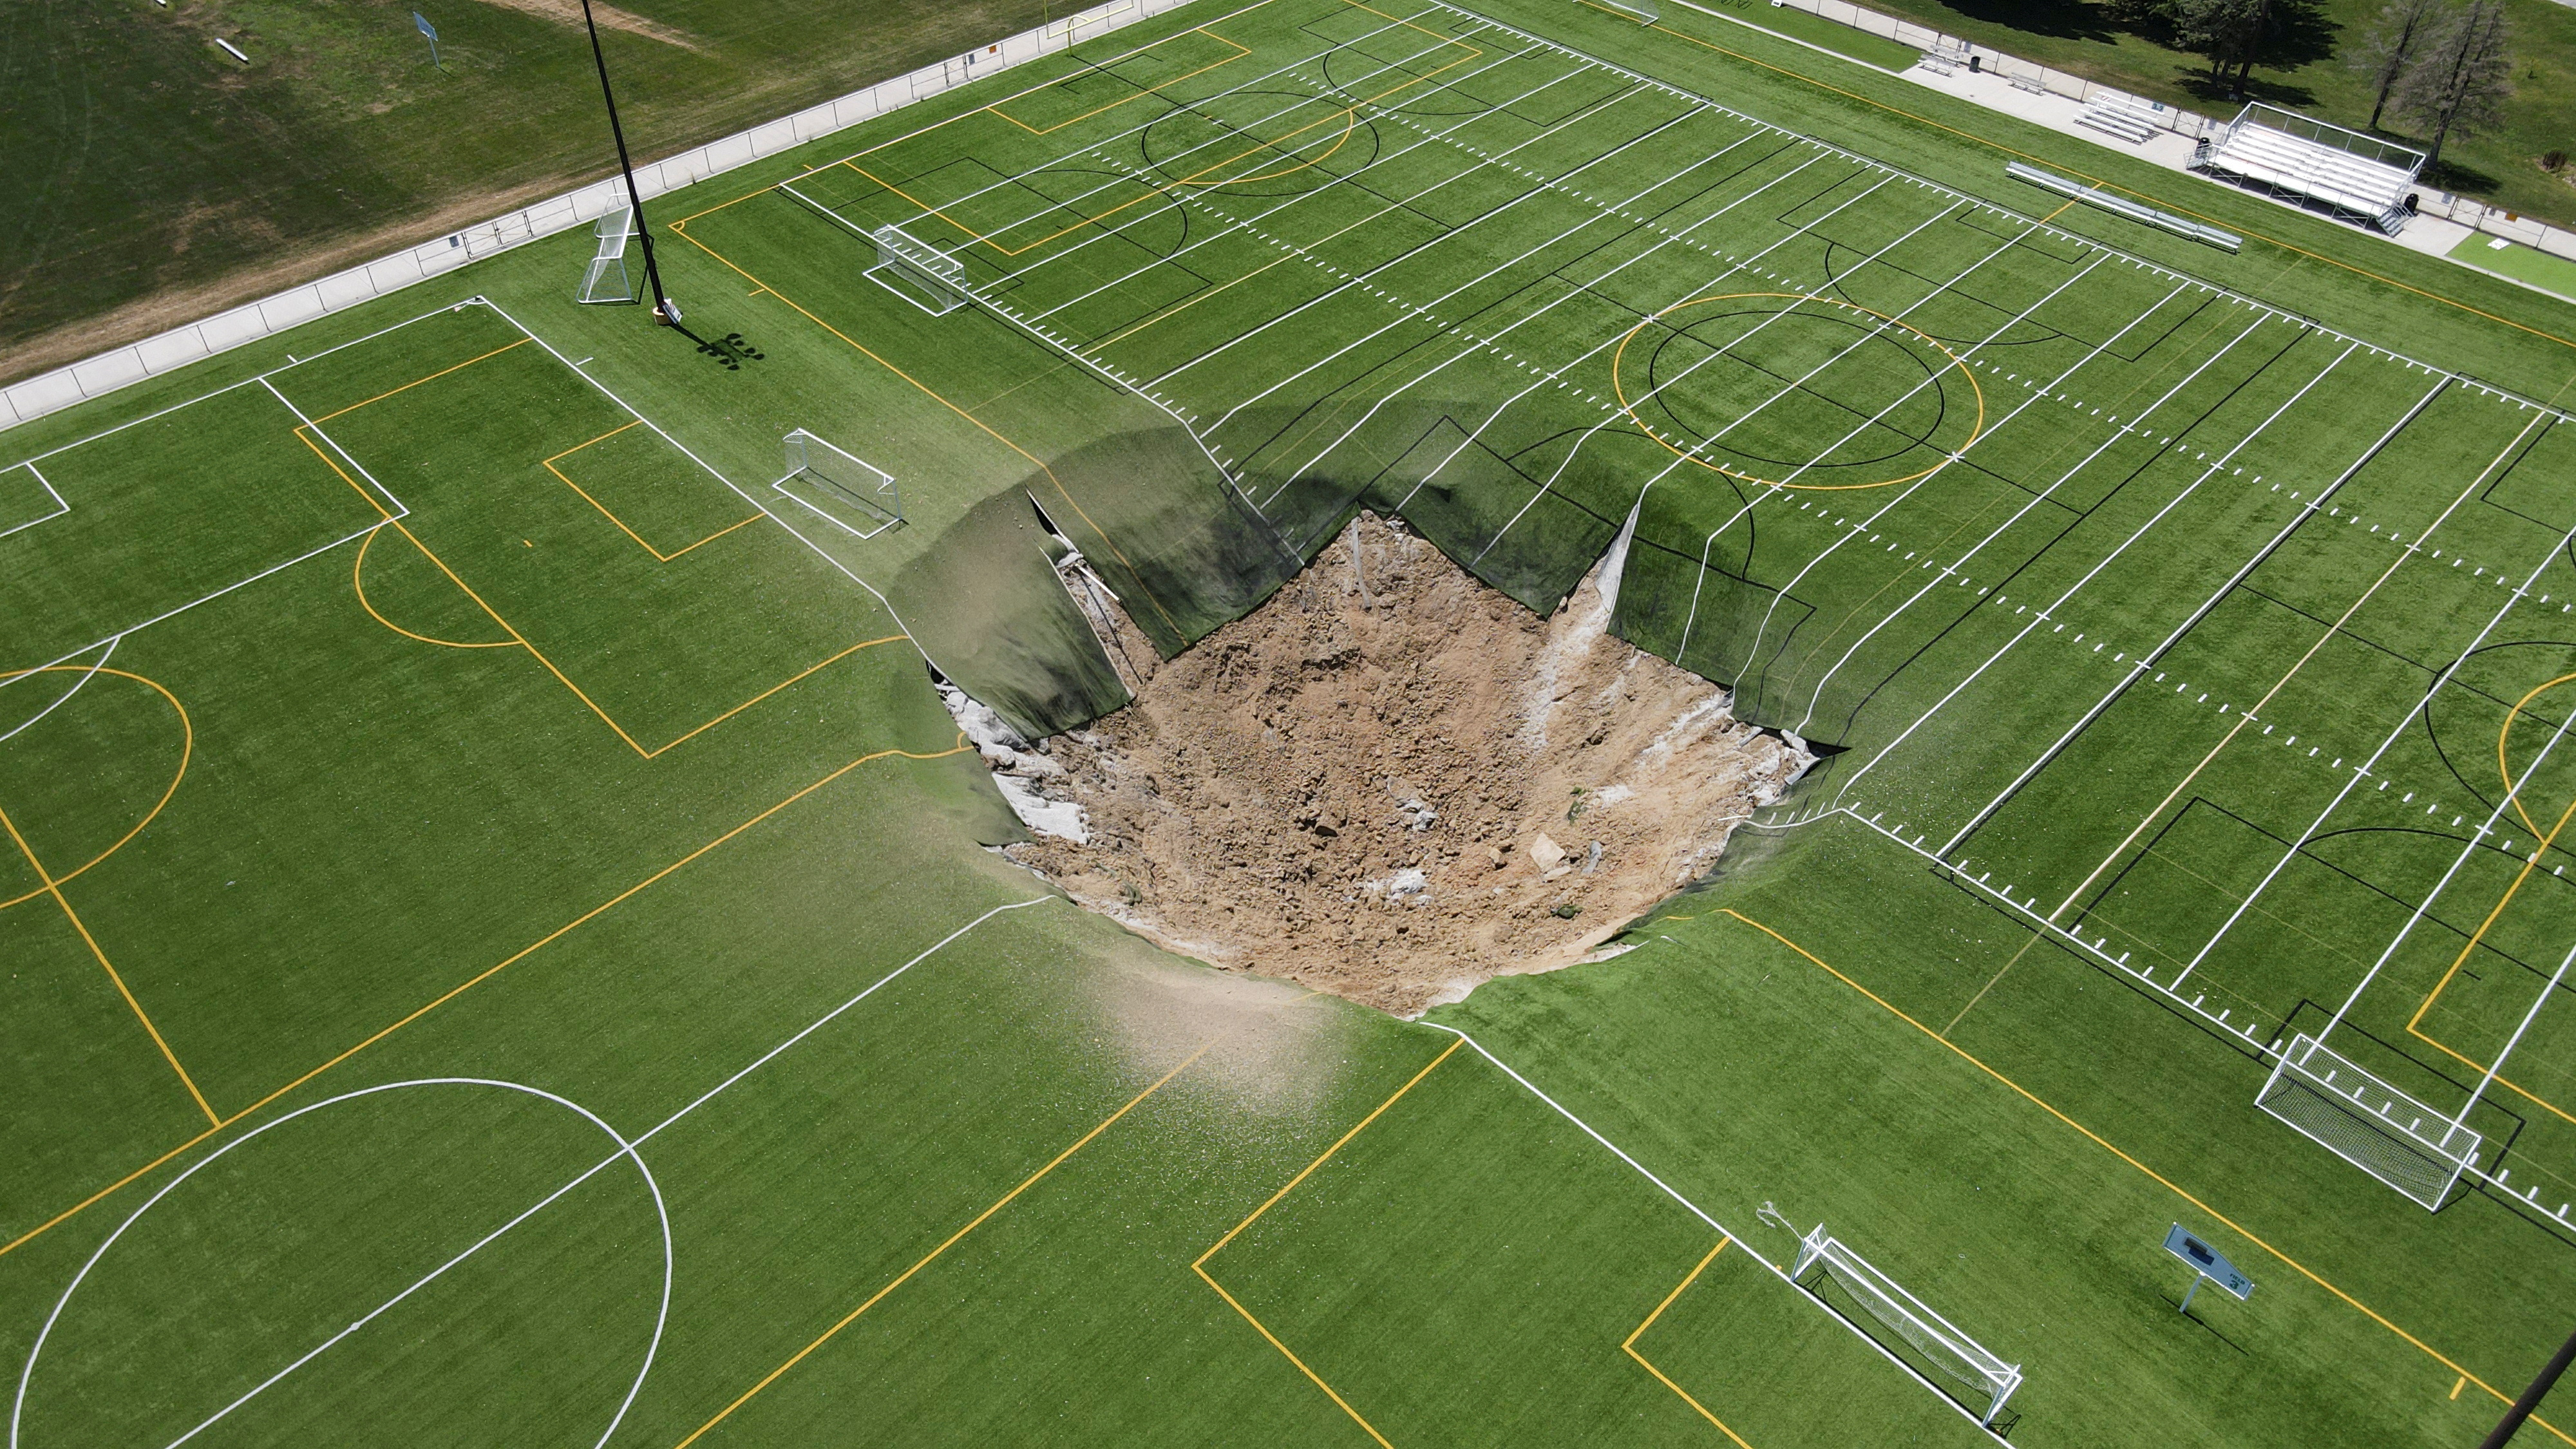 A sinkhole forms on a soccer field in Illinois